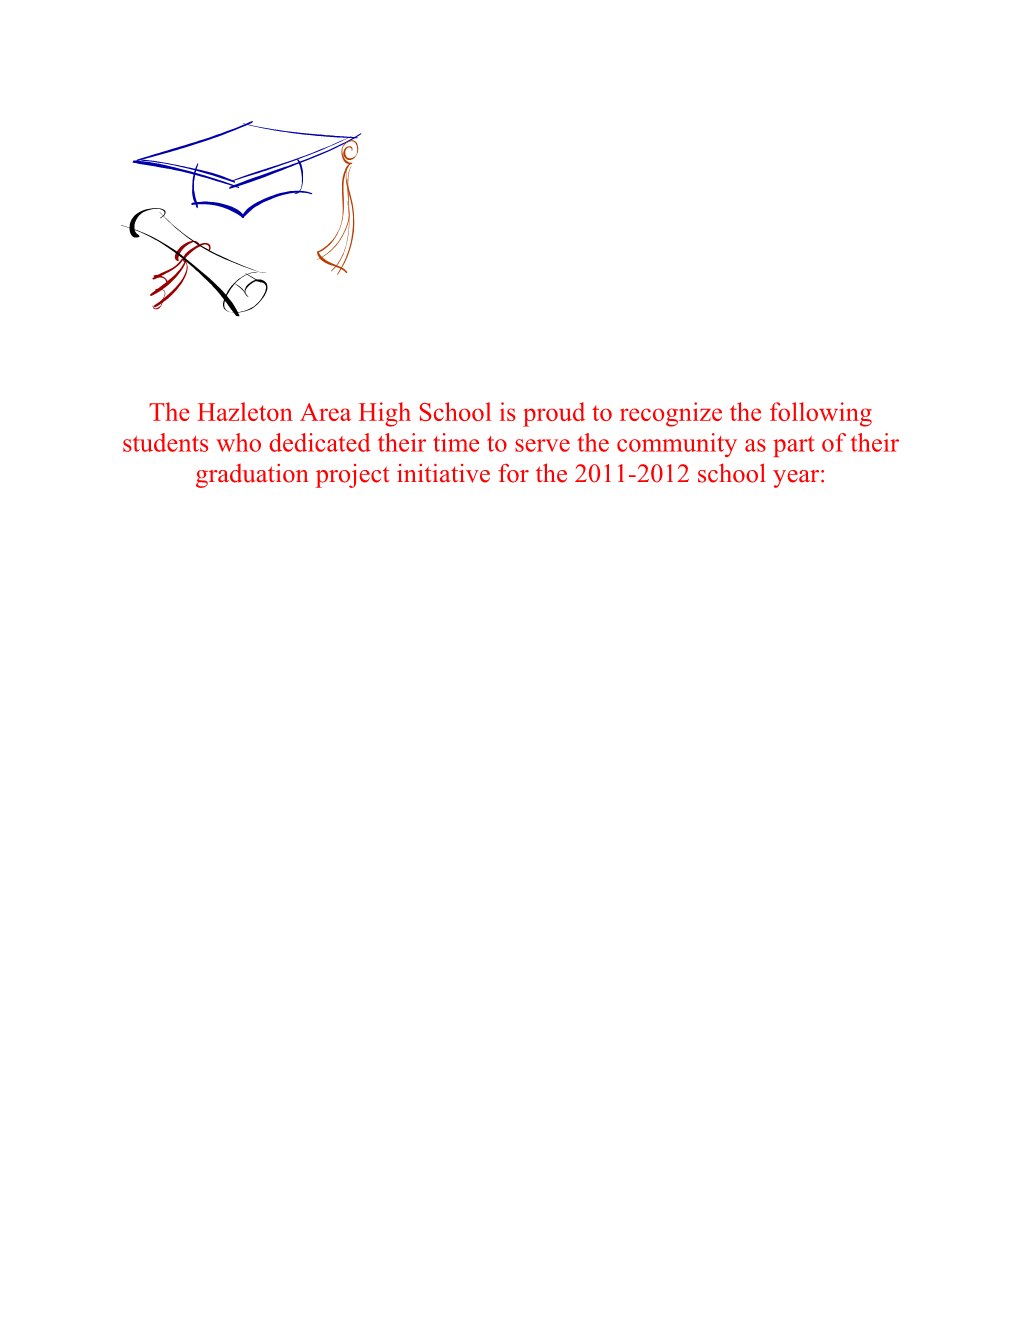 The Hazleton Area High School Is Proud to Recognize the Following Students Who Dedicated